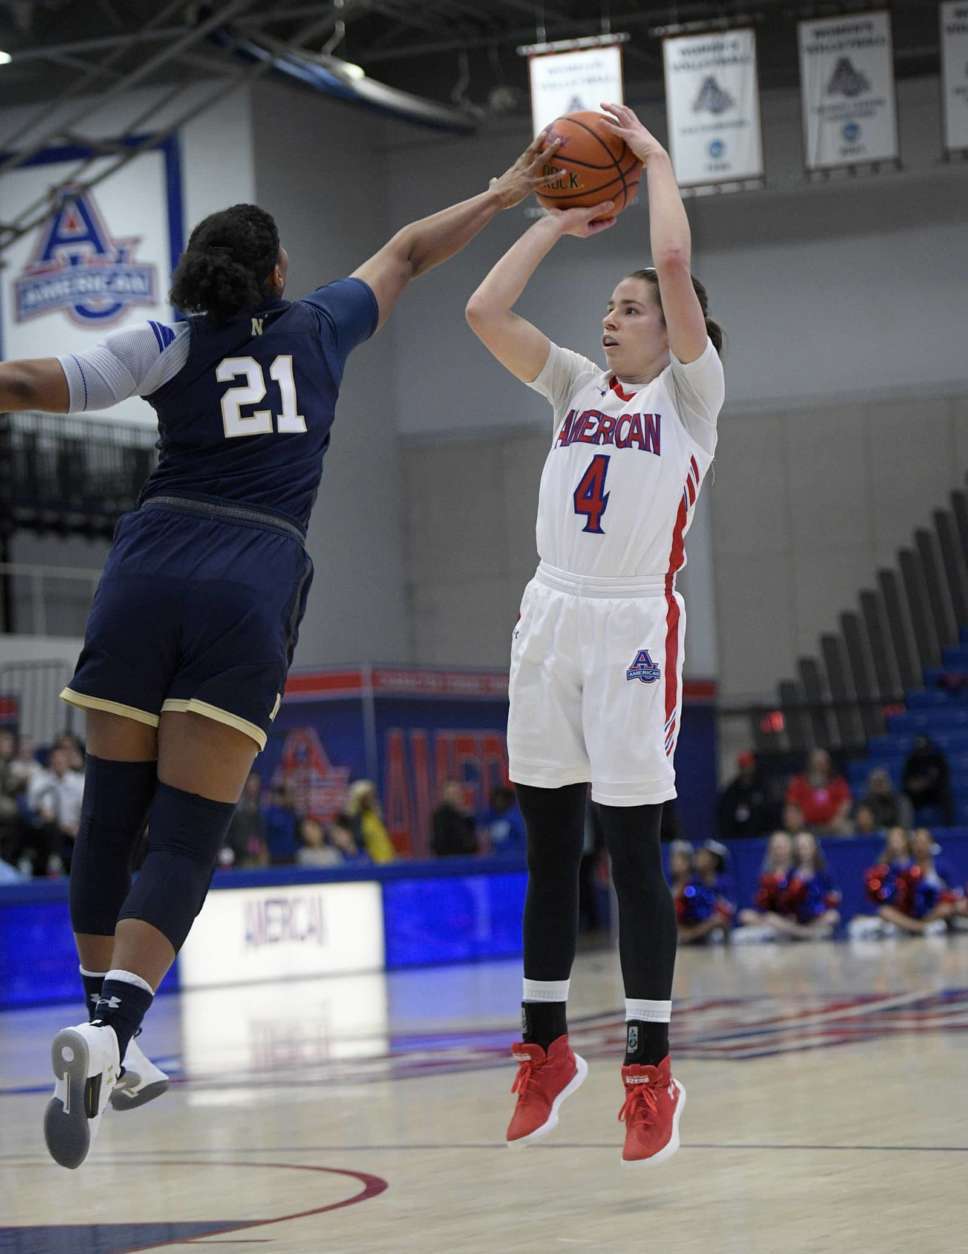 American guard Emily Kinneston (4) shoots against Navy guard Jasmine Bishop (21) during the first half an NCAA college basketball game for the Patriot League women's tournament championship, Sunday, March 11, 2018, in Washington. (AP Photo/Nick Wass)